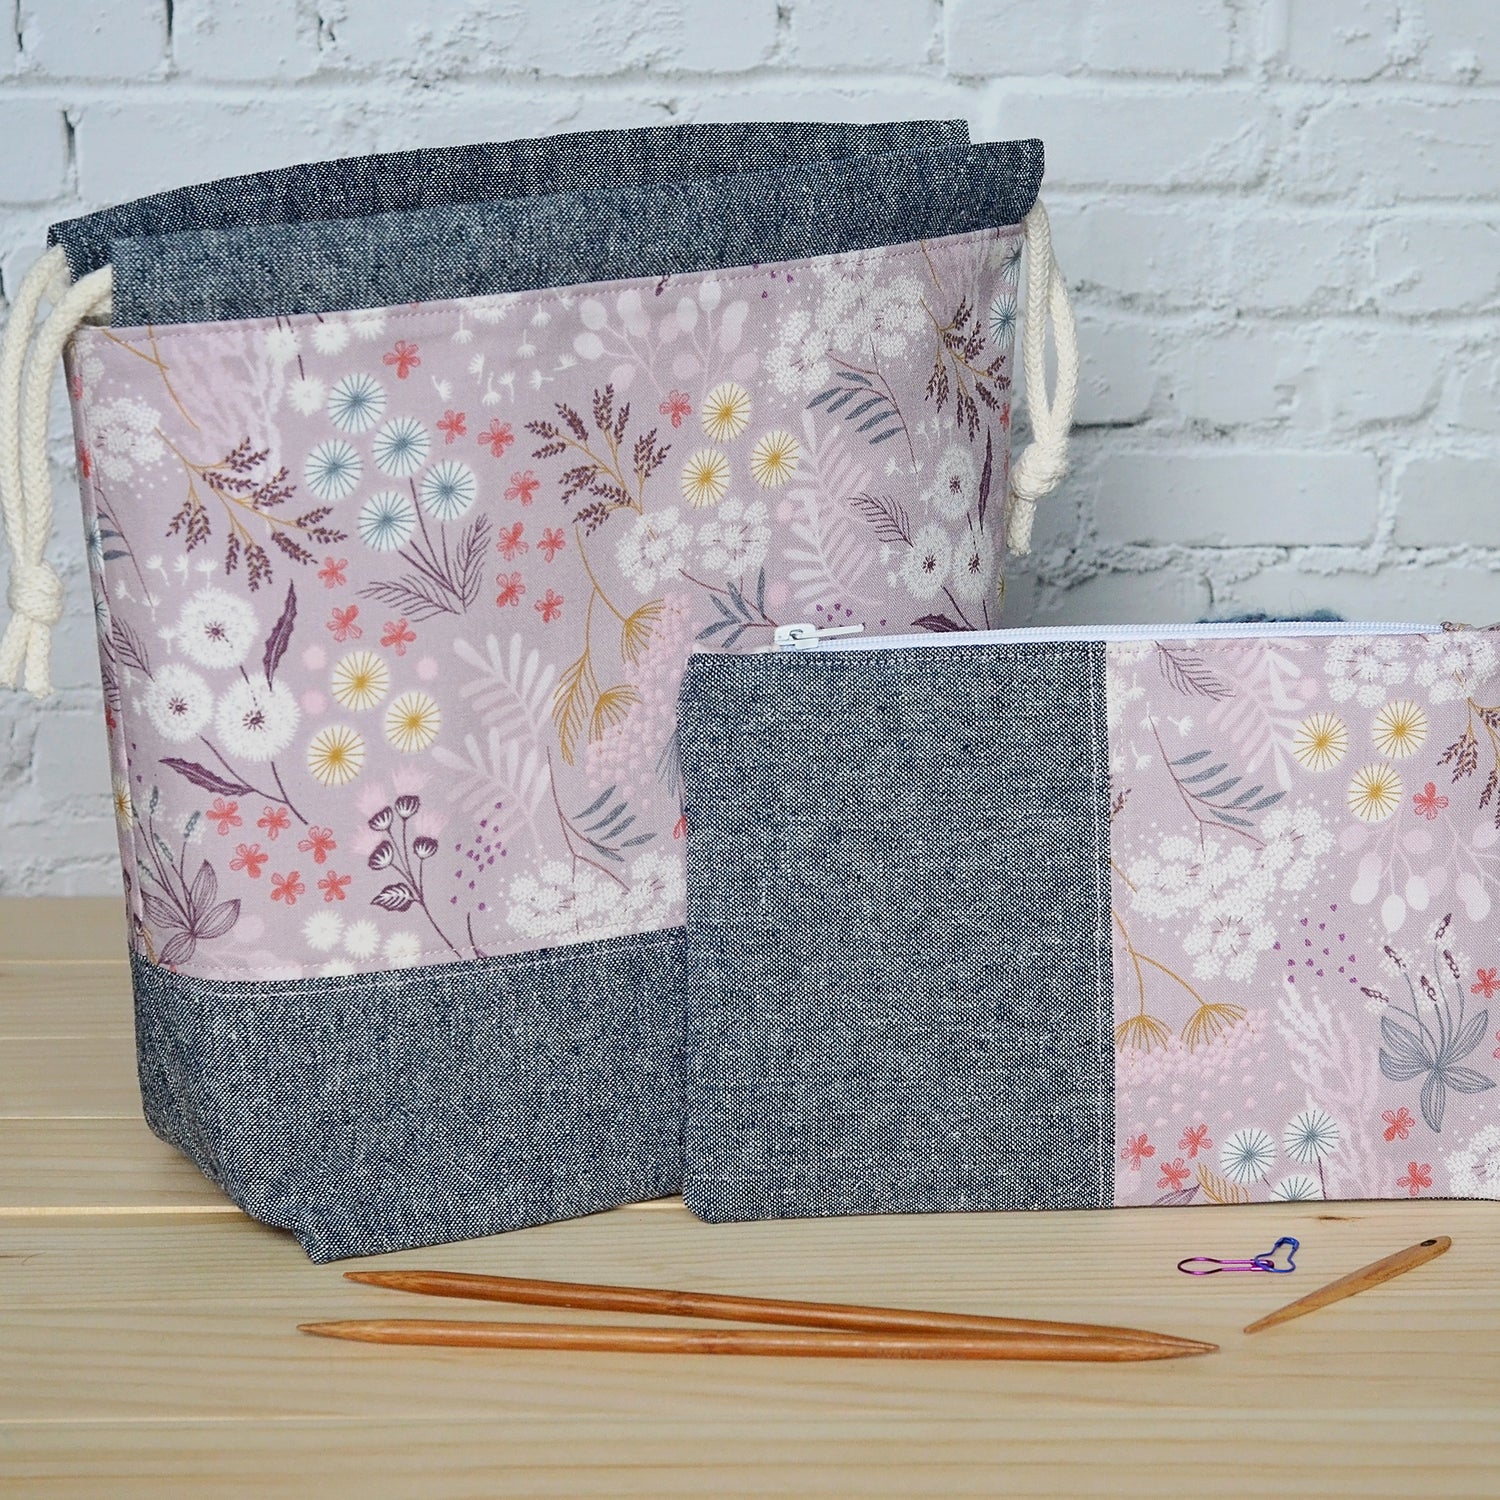 Mauve floral and indigo linen knitting project bag and pouch set.